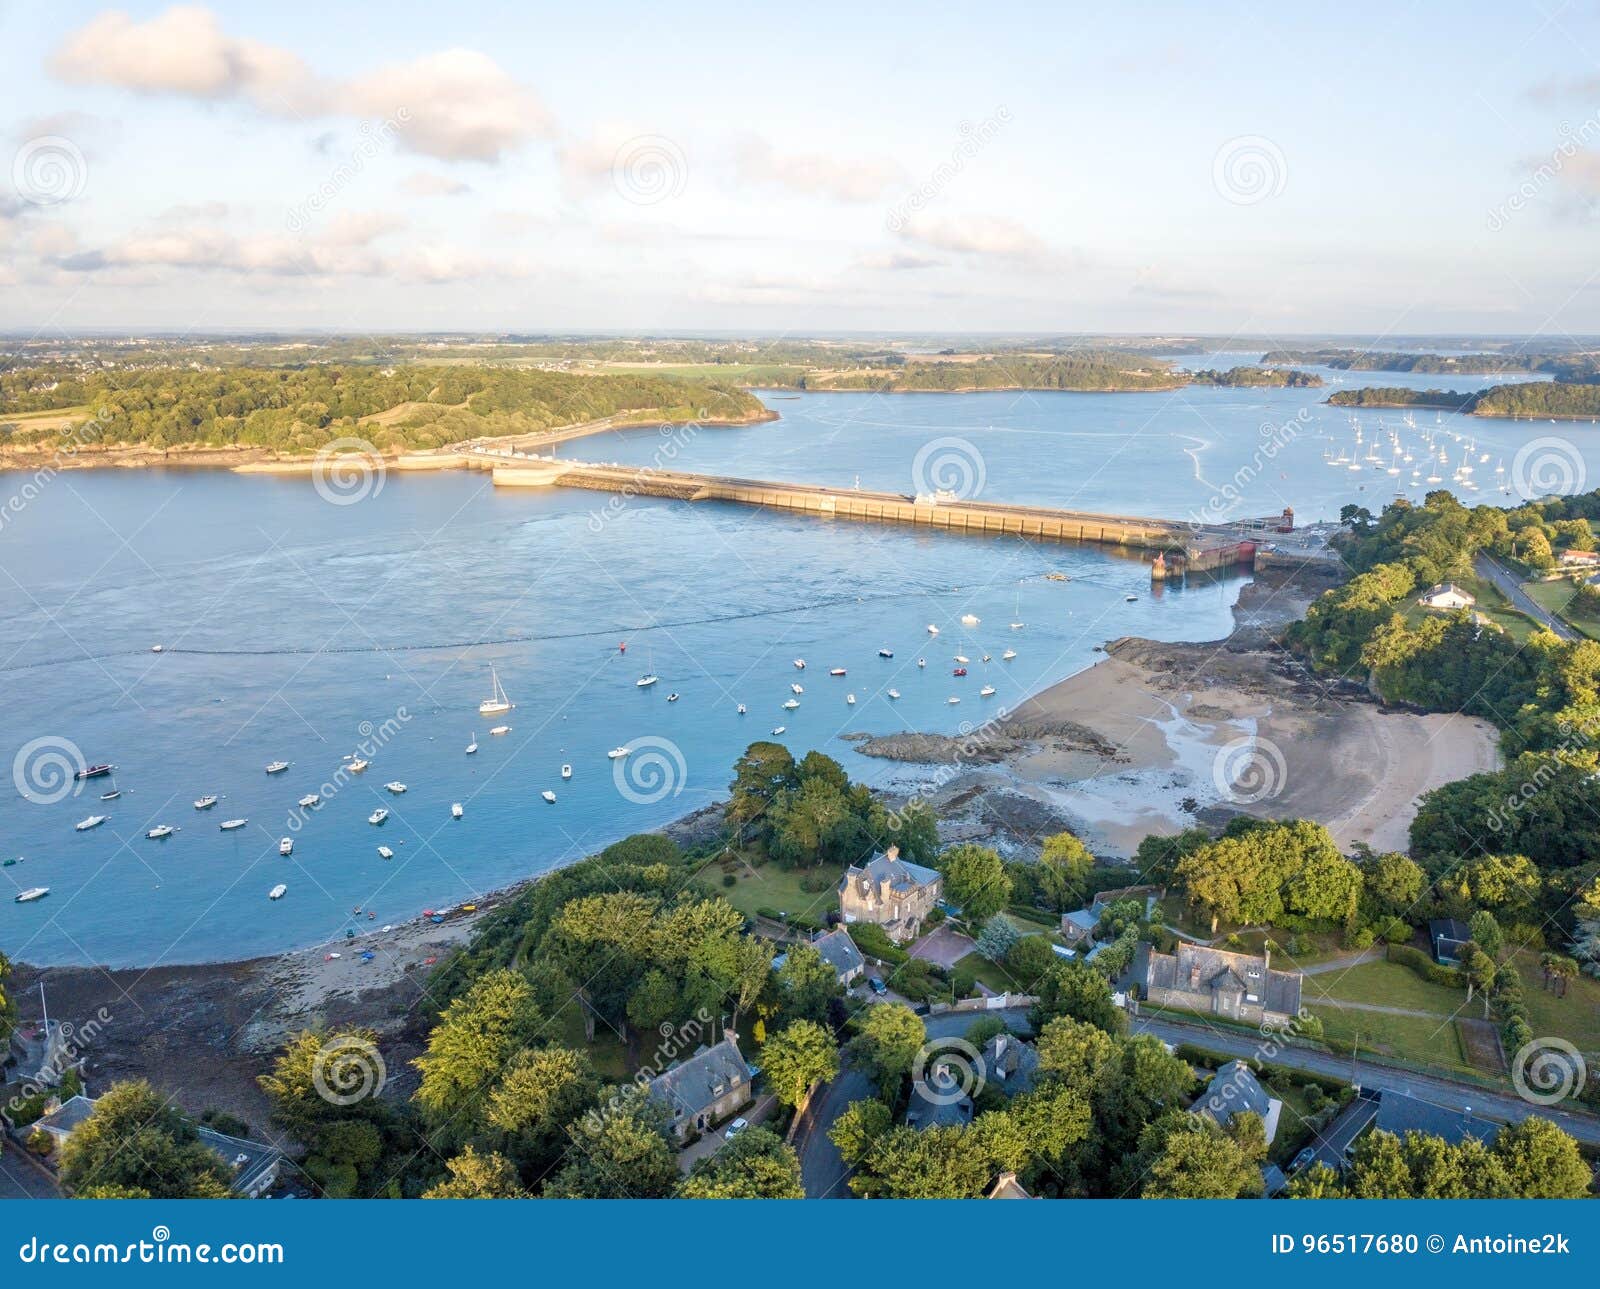 aerial view on barrage de la rance in brittany close to saint malo, tidal energy at sunset